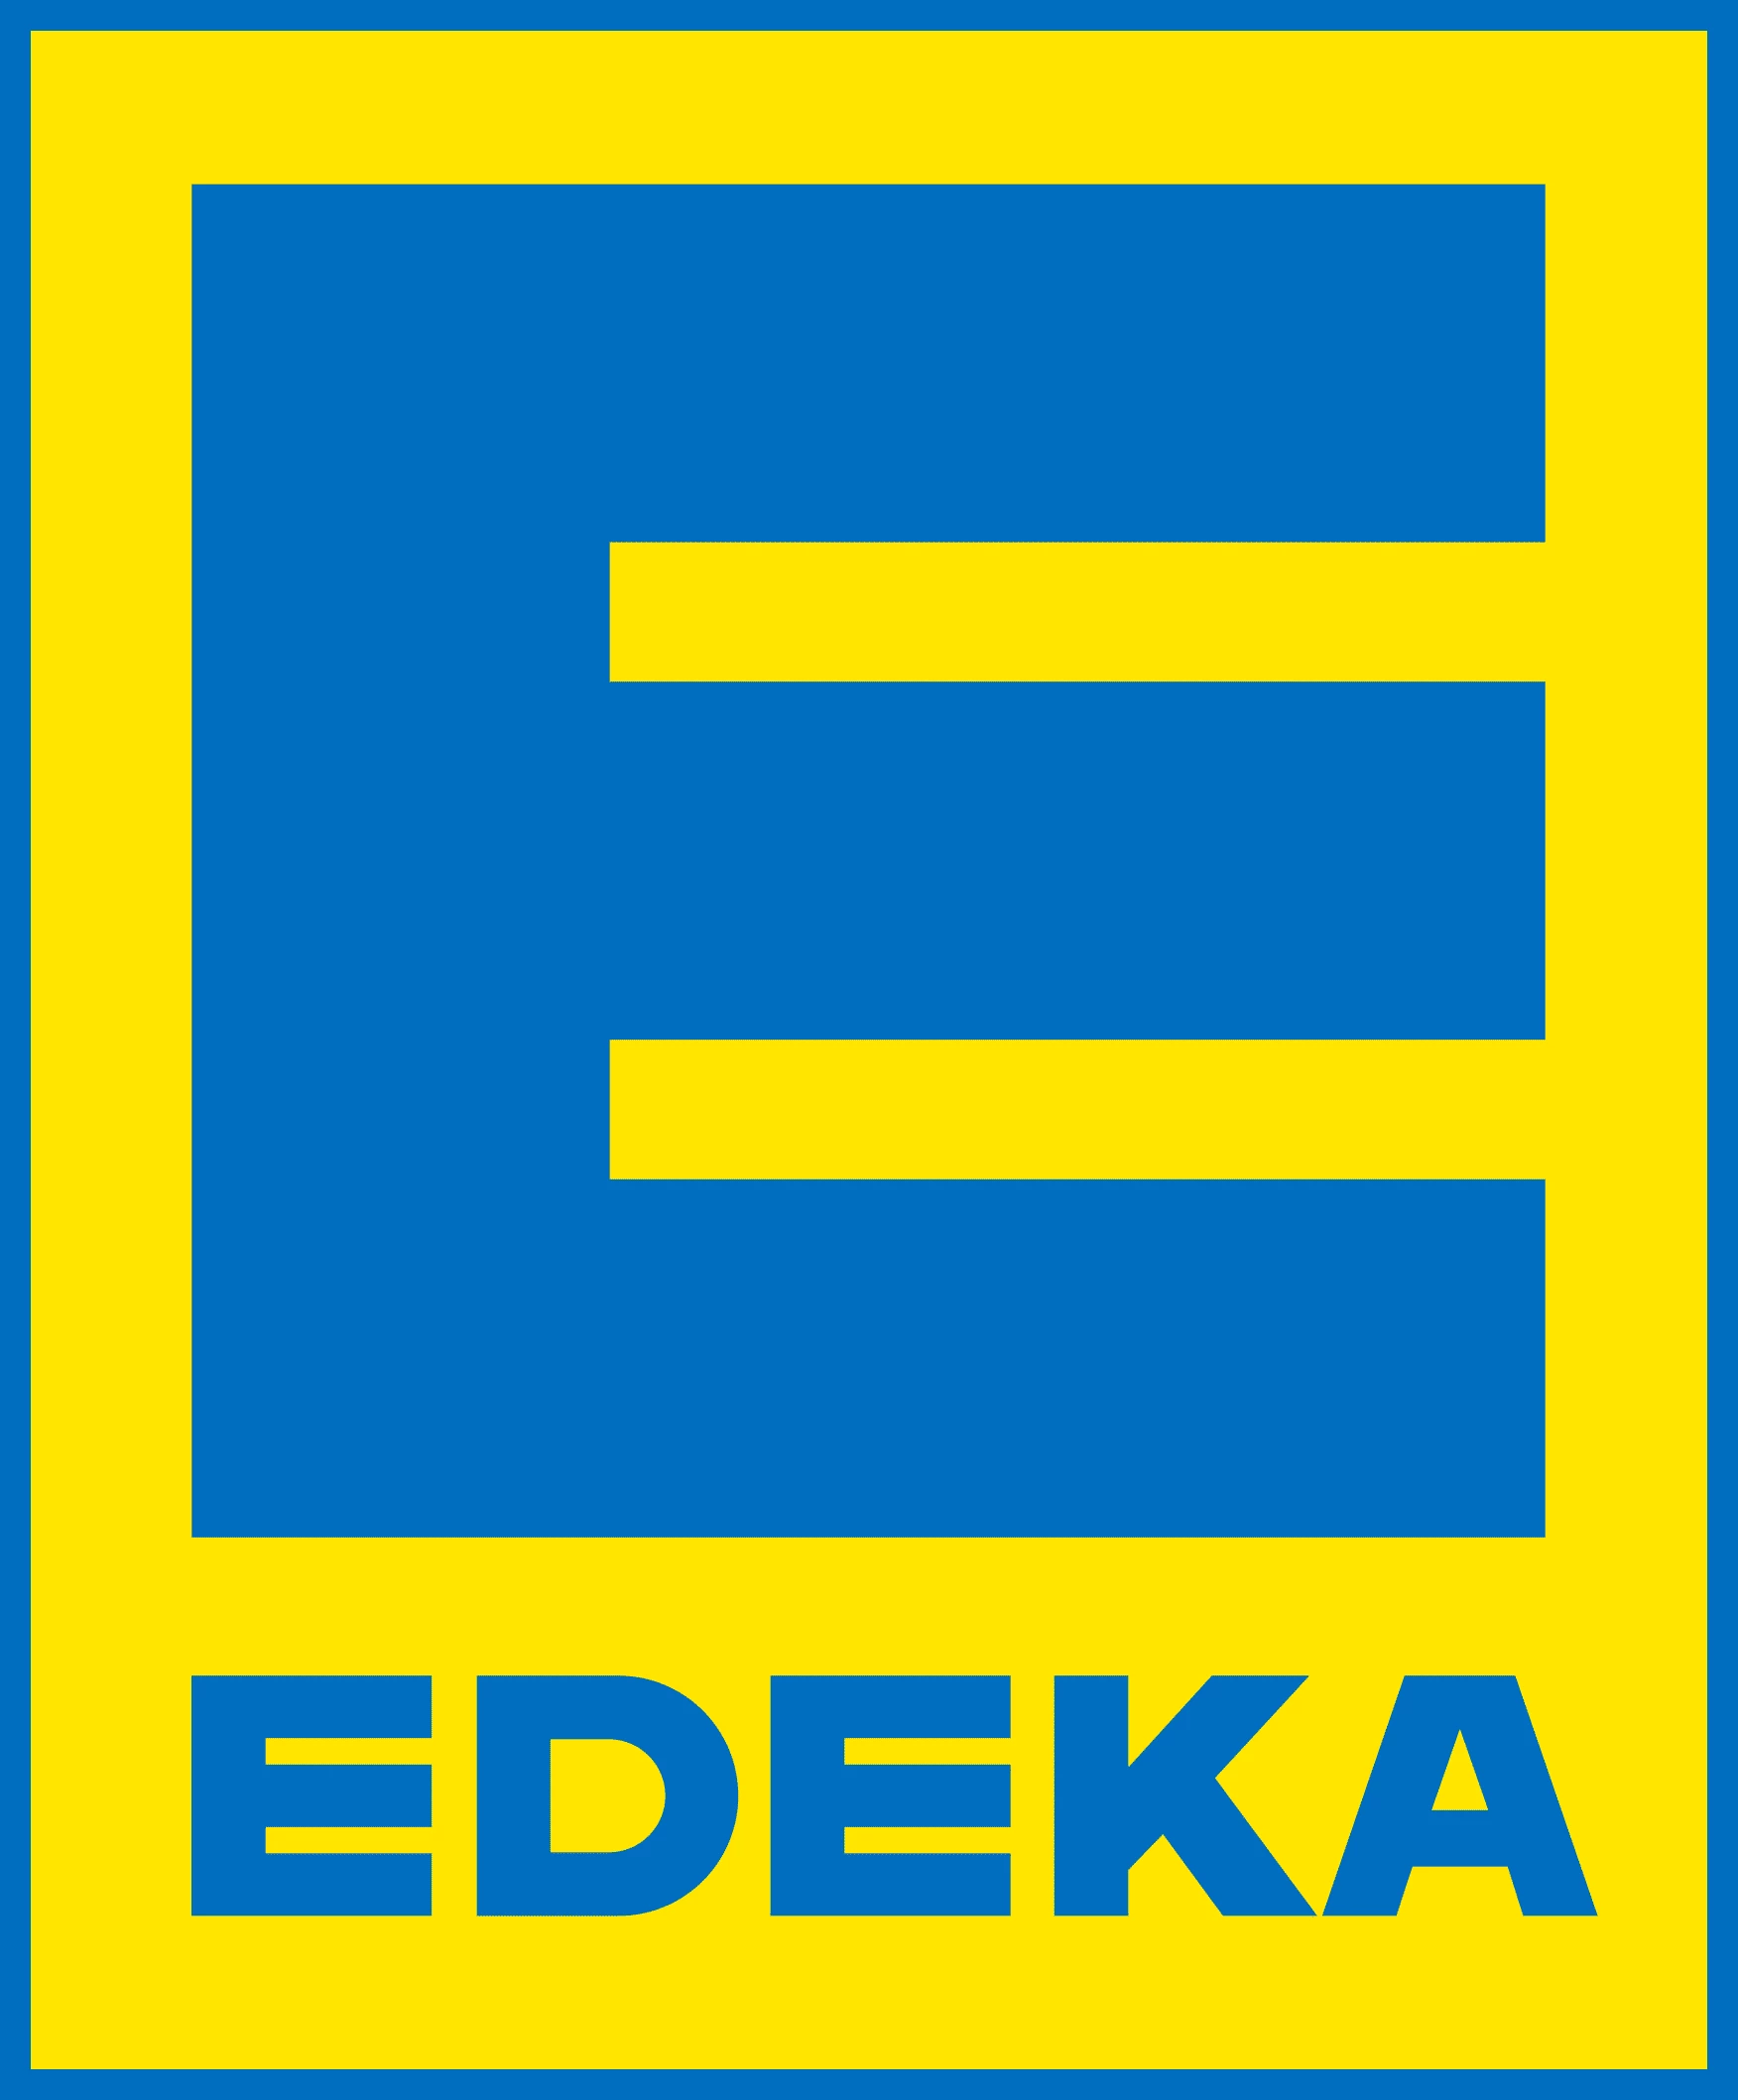 Integrated Business and Retail planning at Edeka Image 1